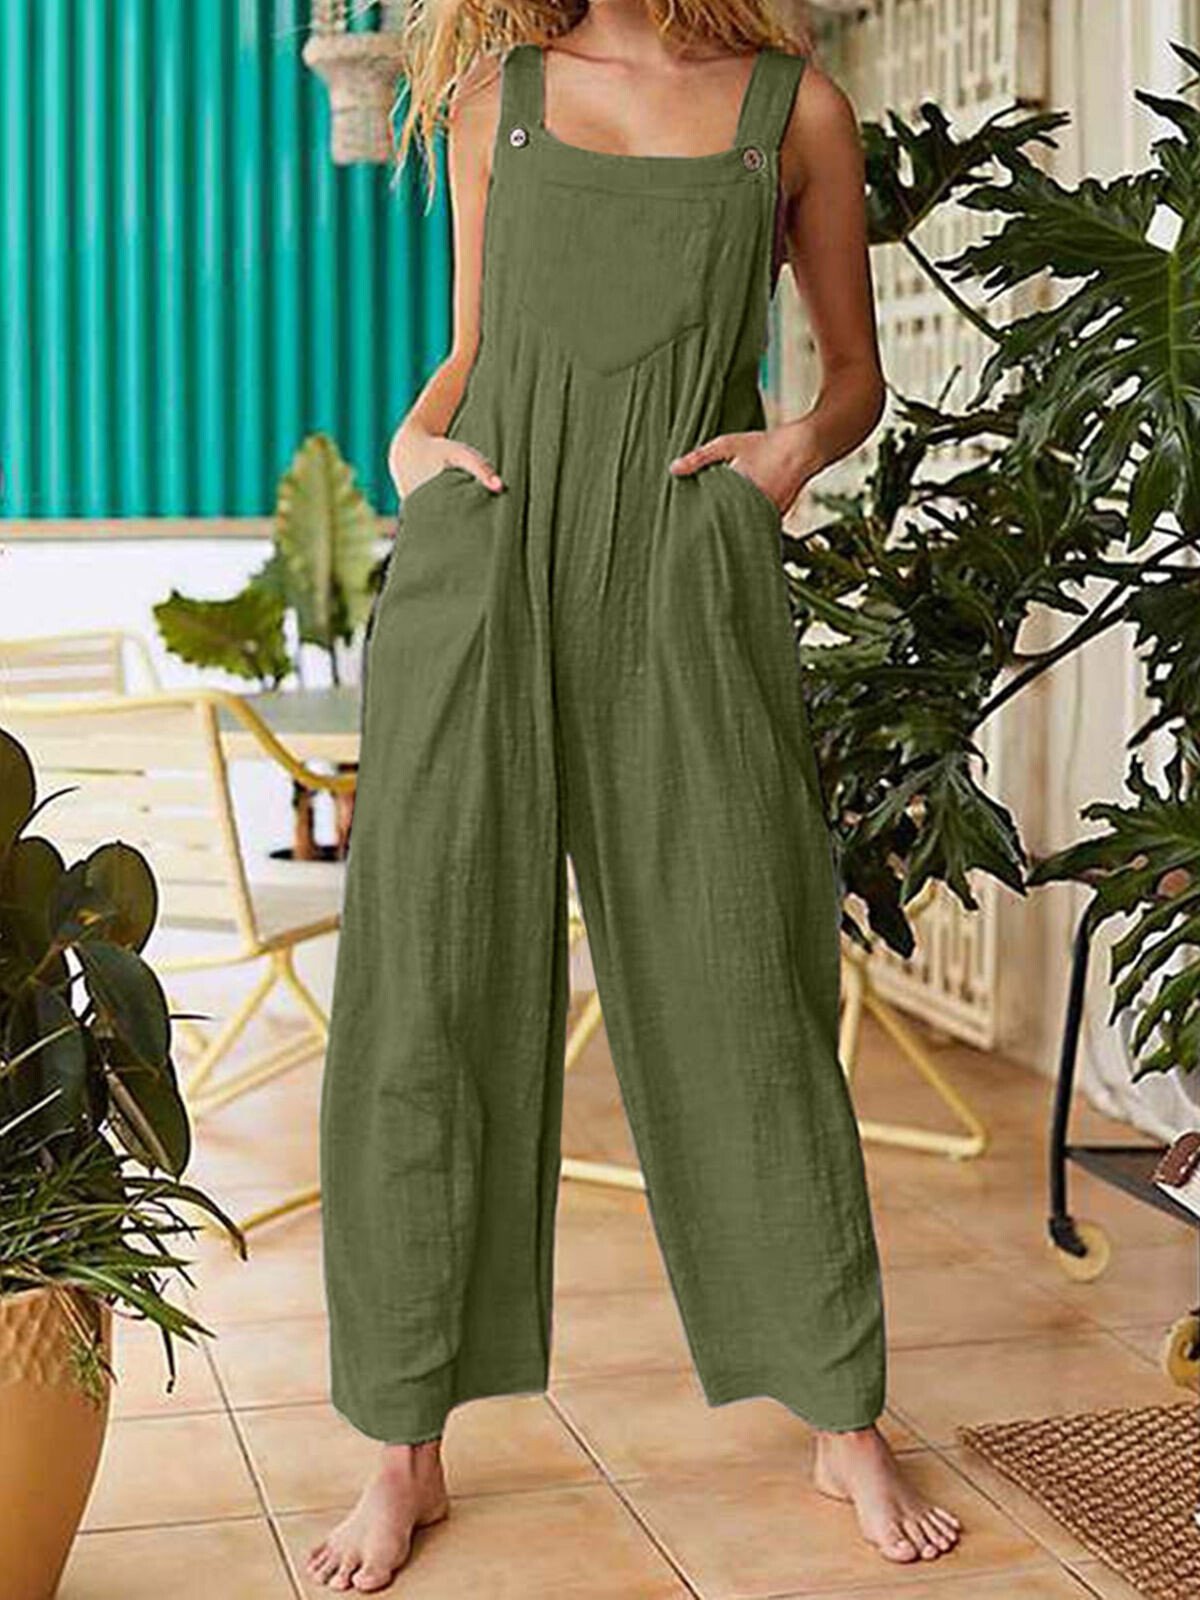 Women's Pure Color Casual Cotton Overalls-colinskeirs